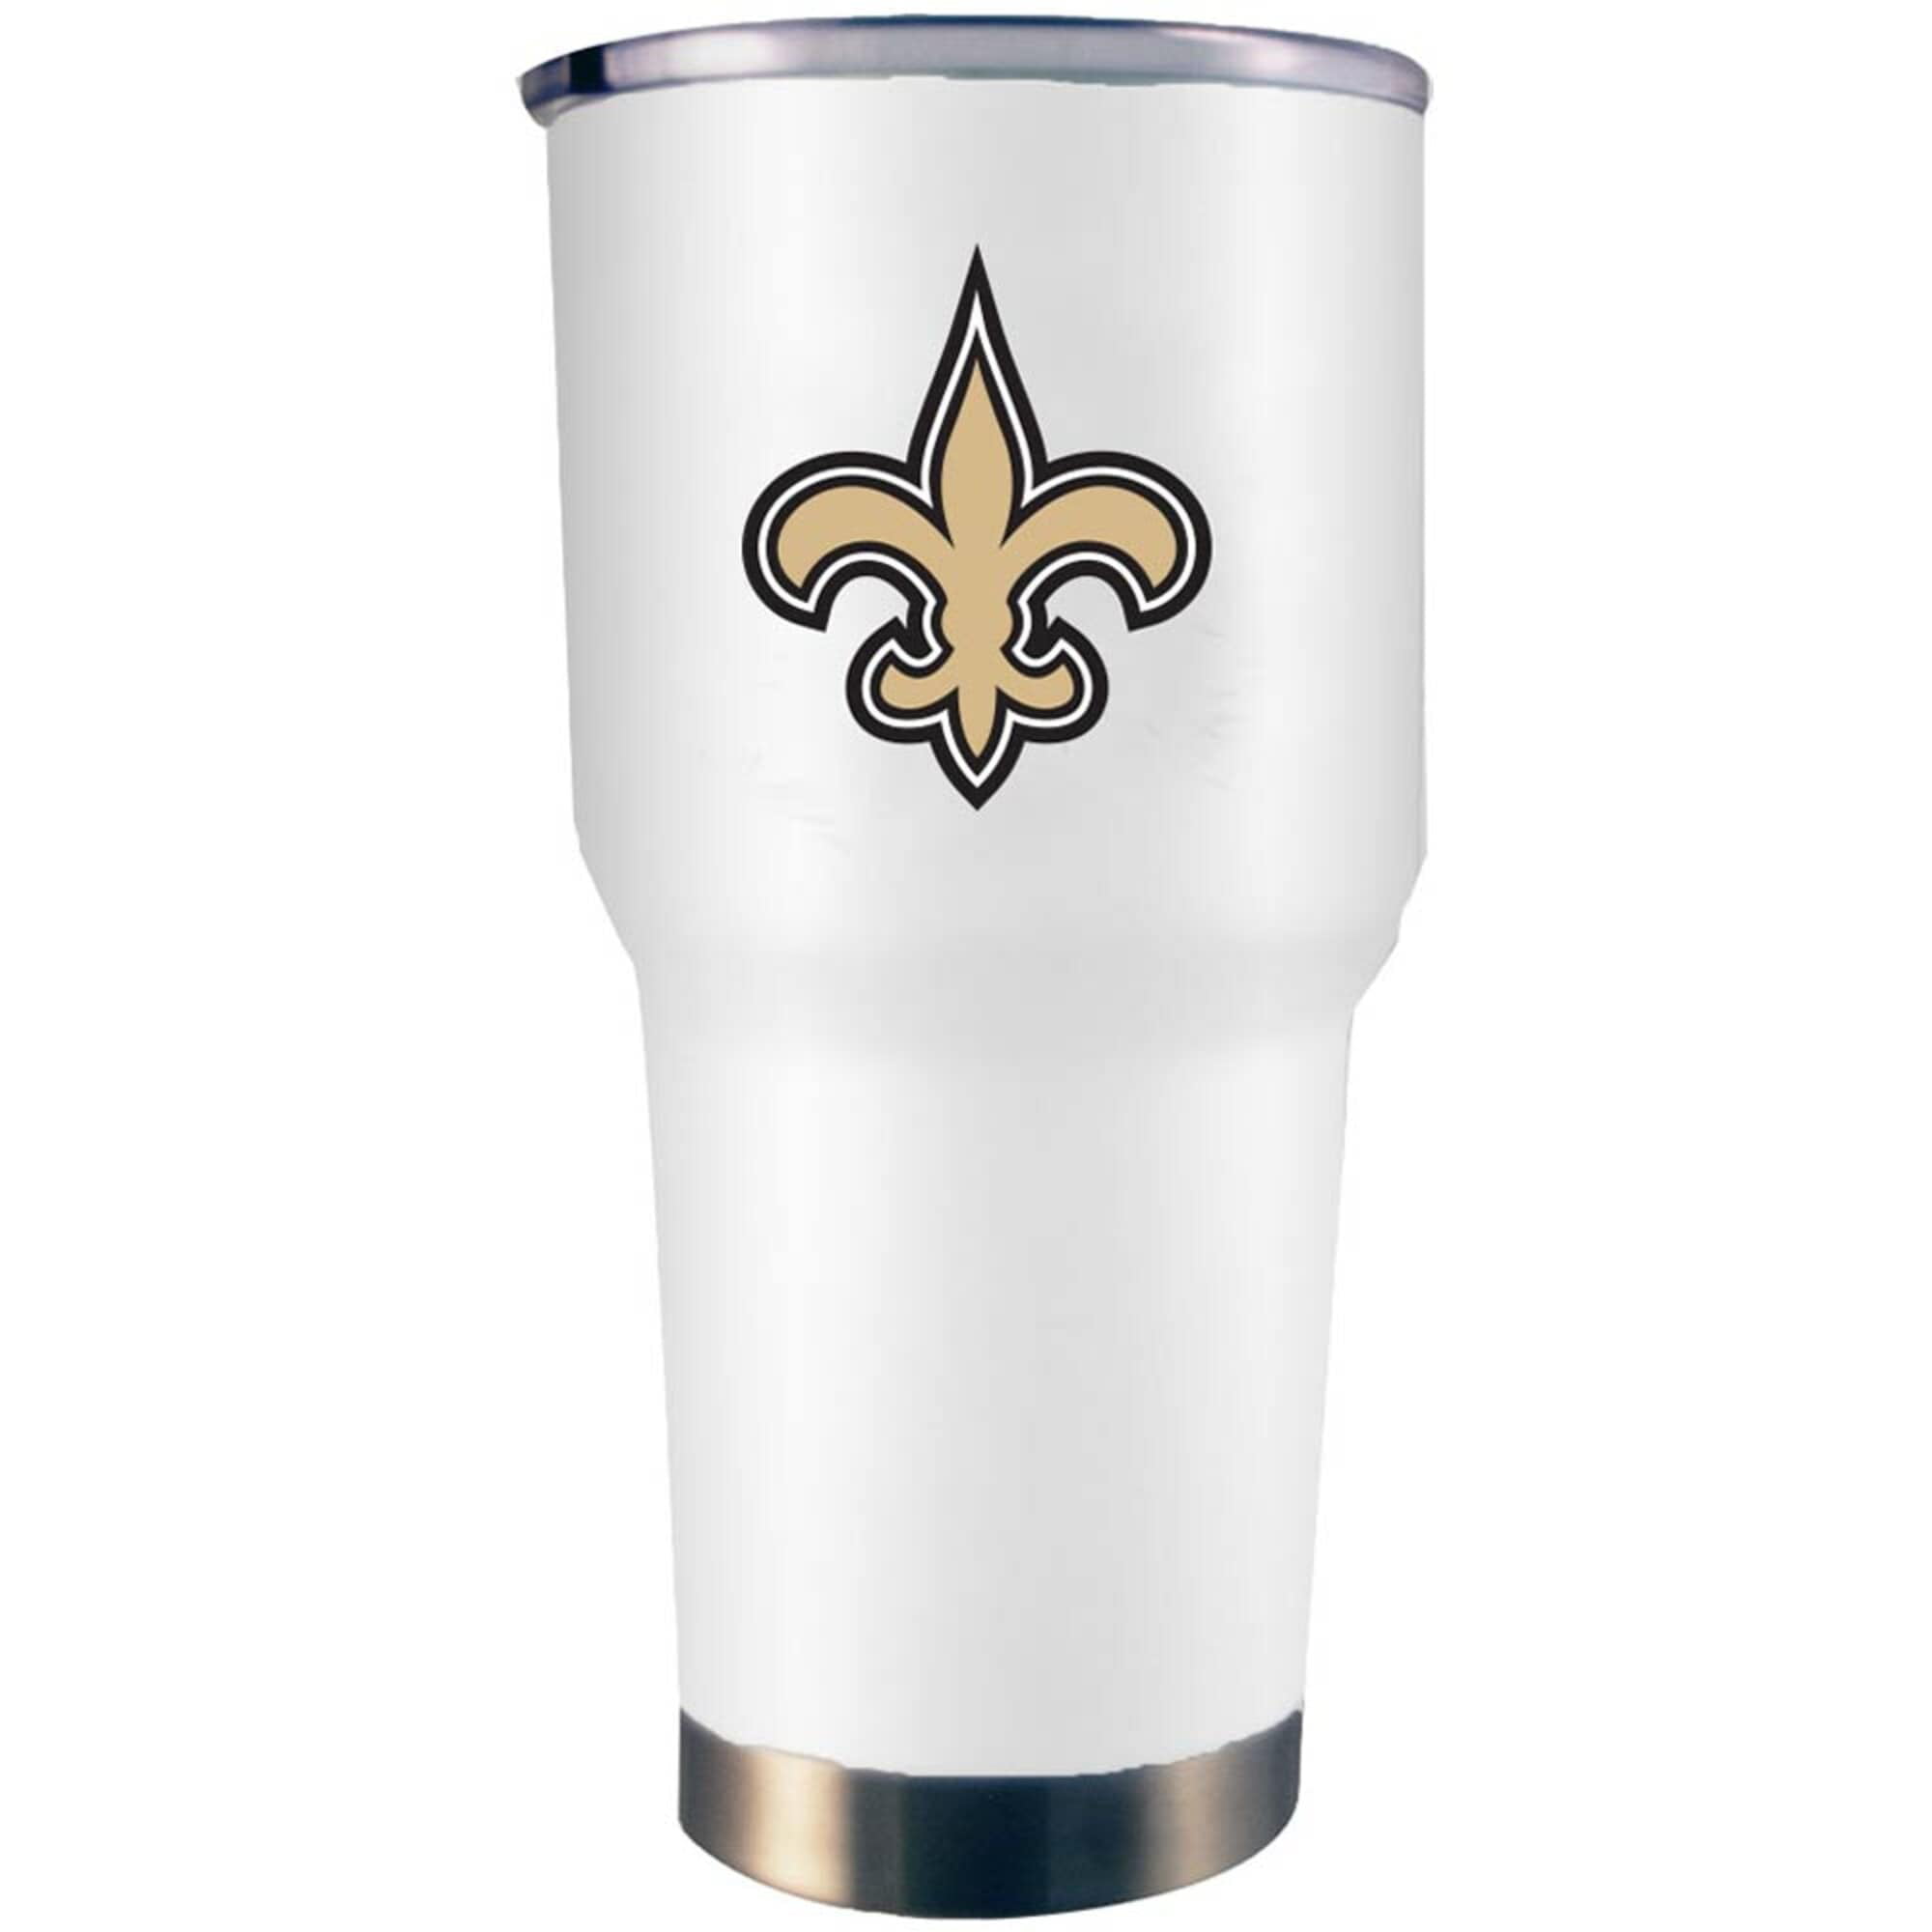 Great American Products New Orleans Saints Stainless Steel Travel Tumbler Metallic Graphics & Metal Emblem 16 Oz. 